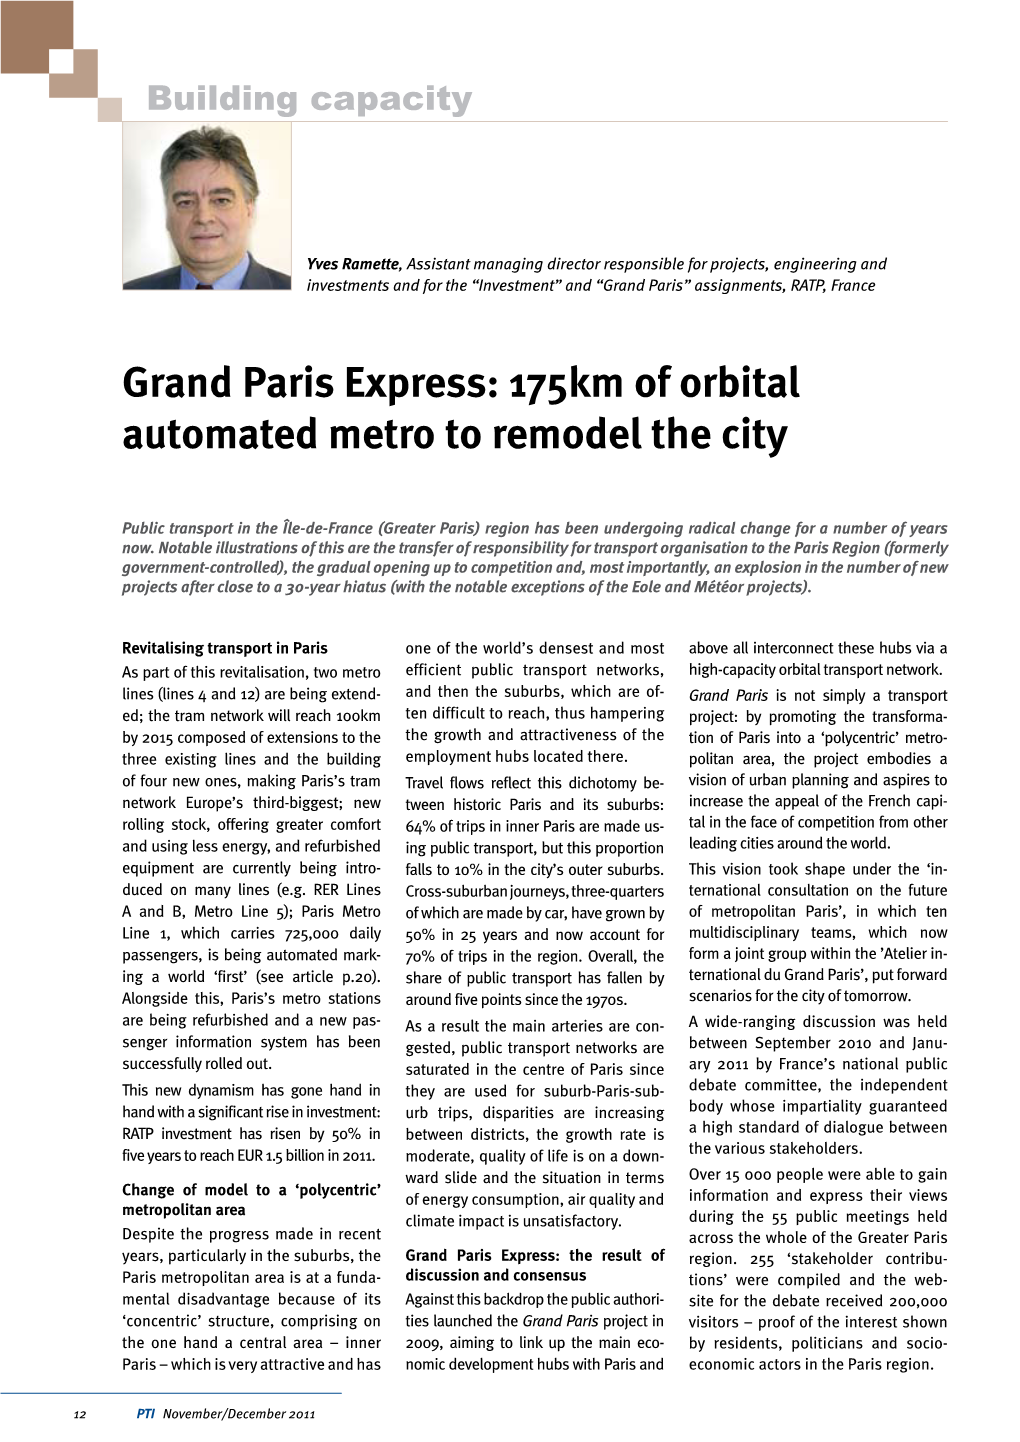 Grand Paris Express: 175Km of Orbital Automated Metro to Remodel the City